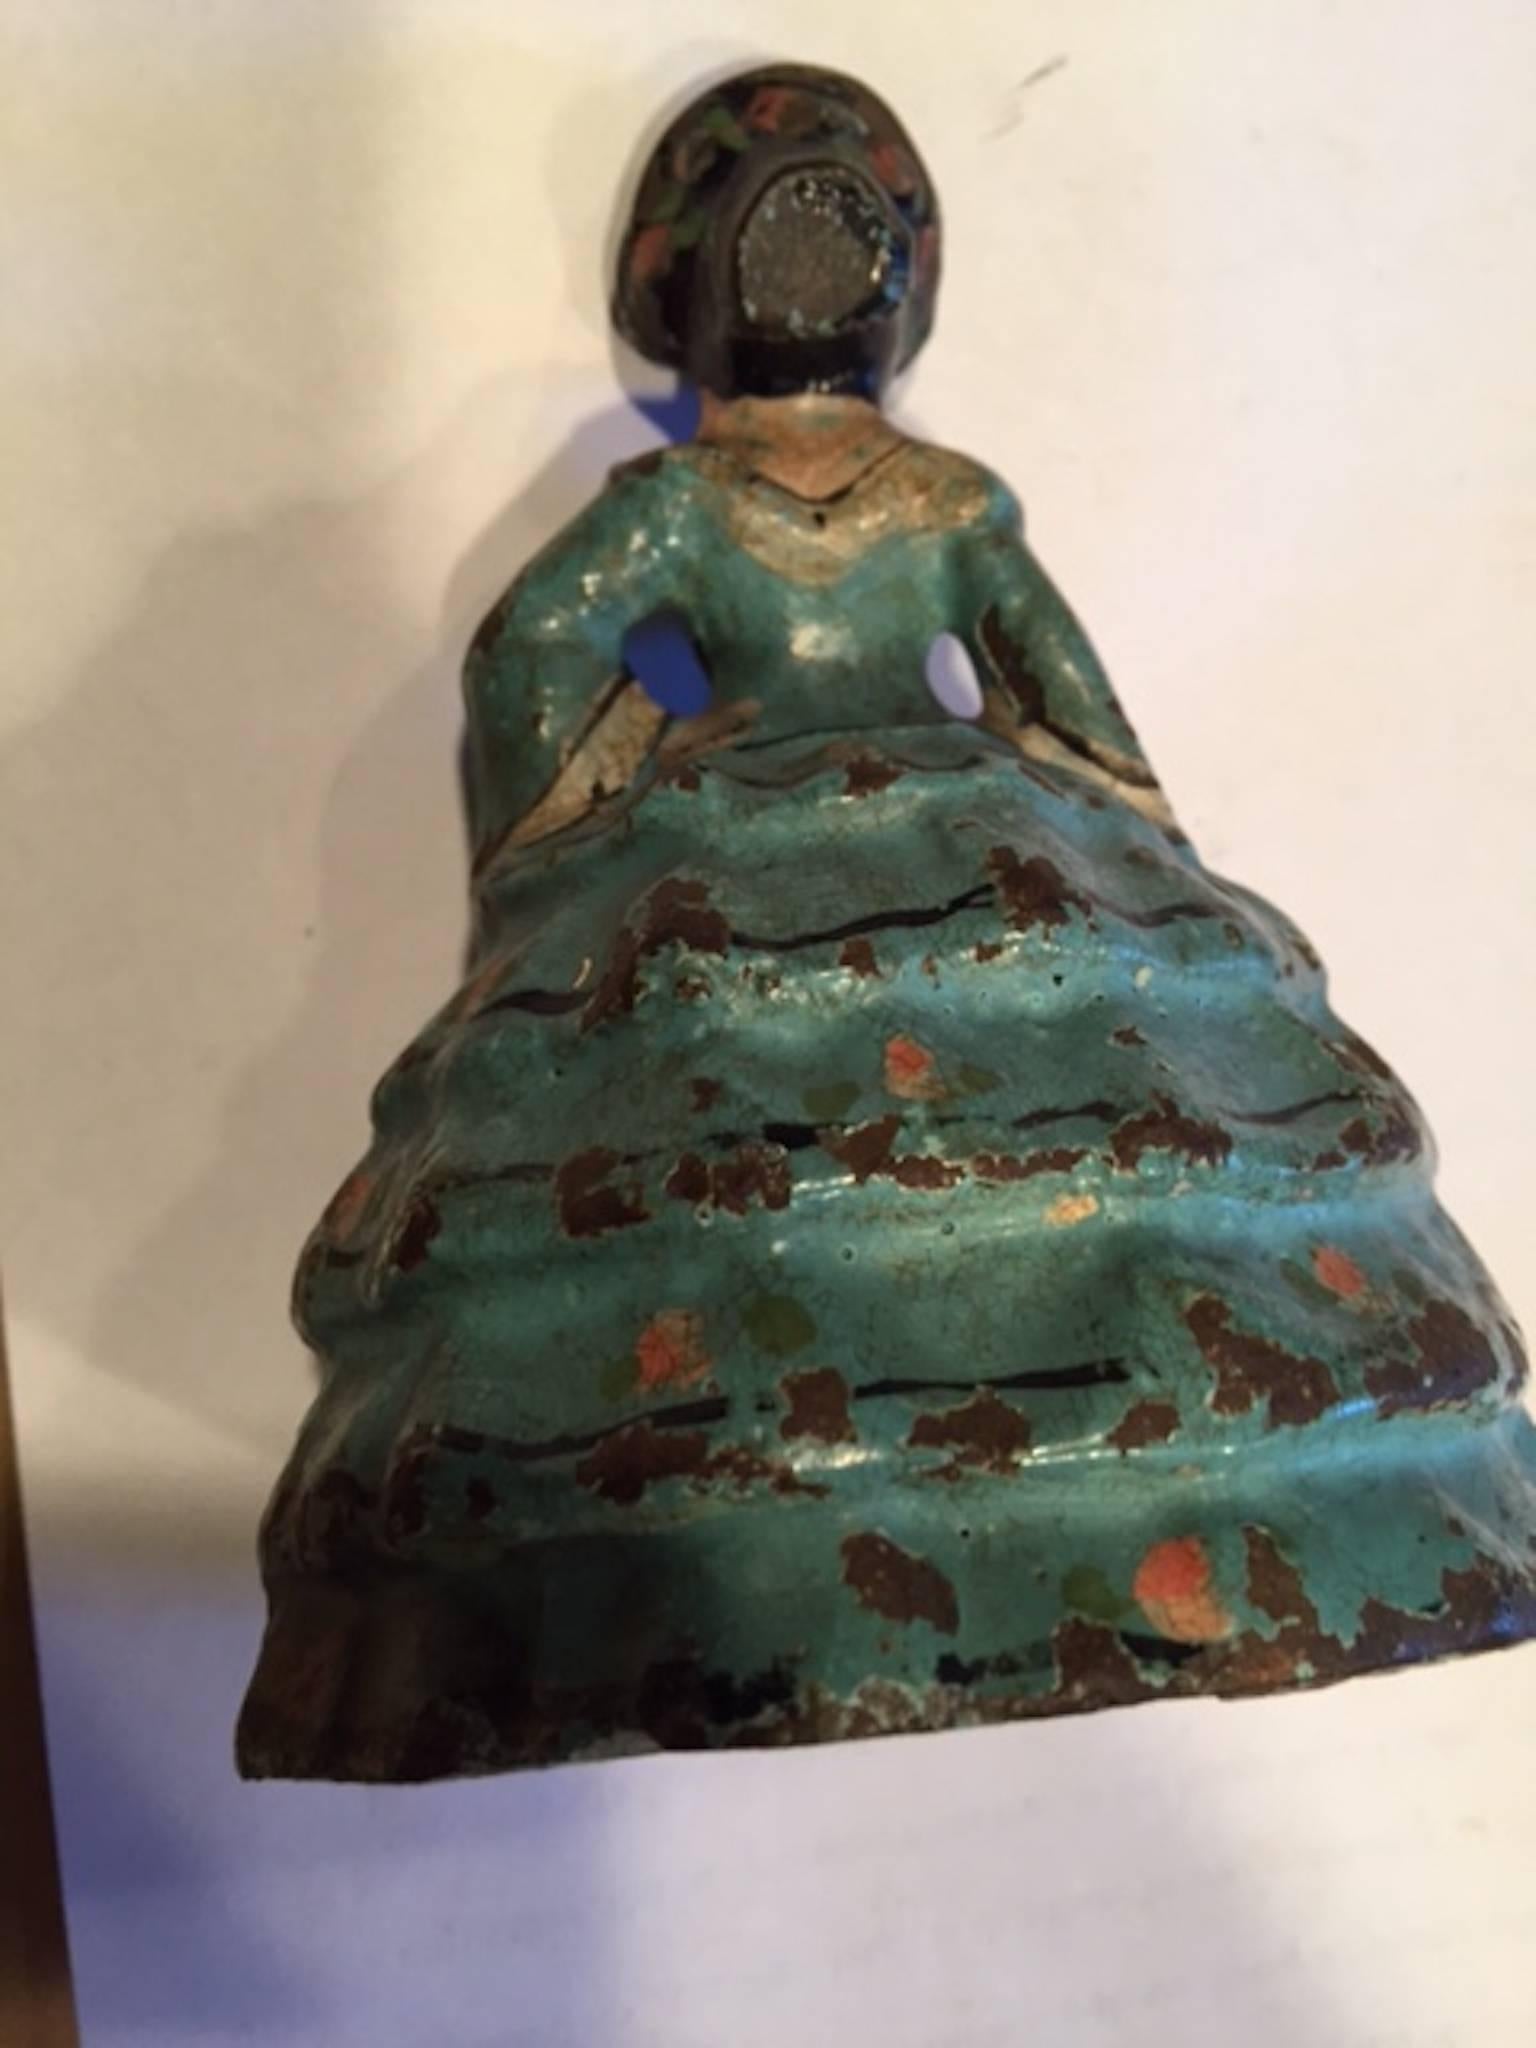 Antique Cast Iron Woman Doorstop Southern Belle
Condition: paint chips and scuffs, generally good.